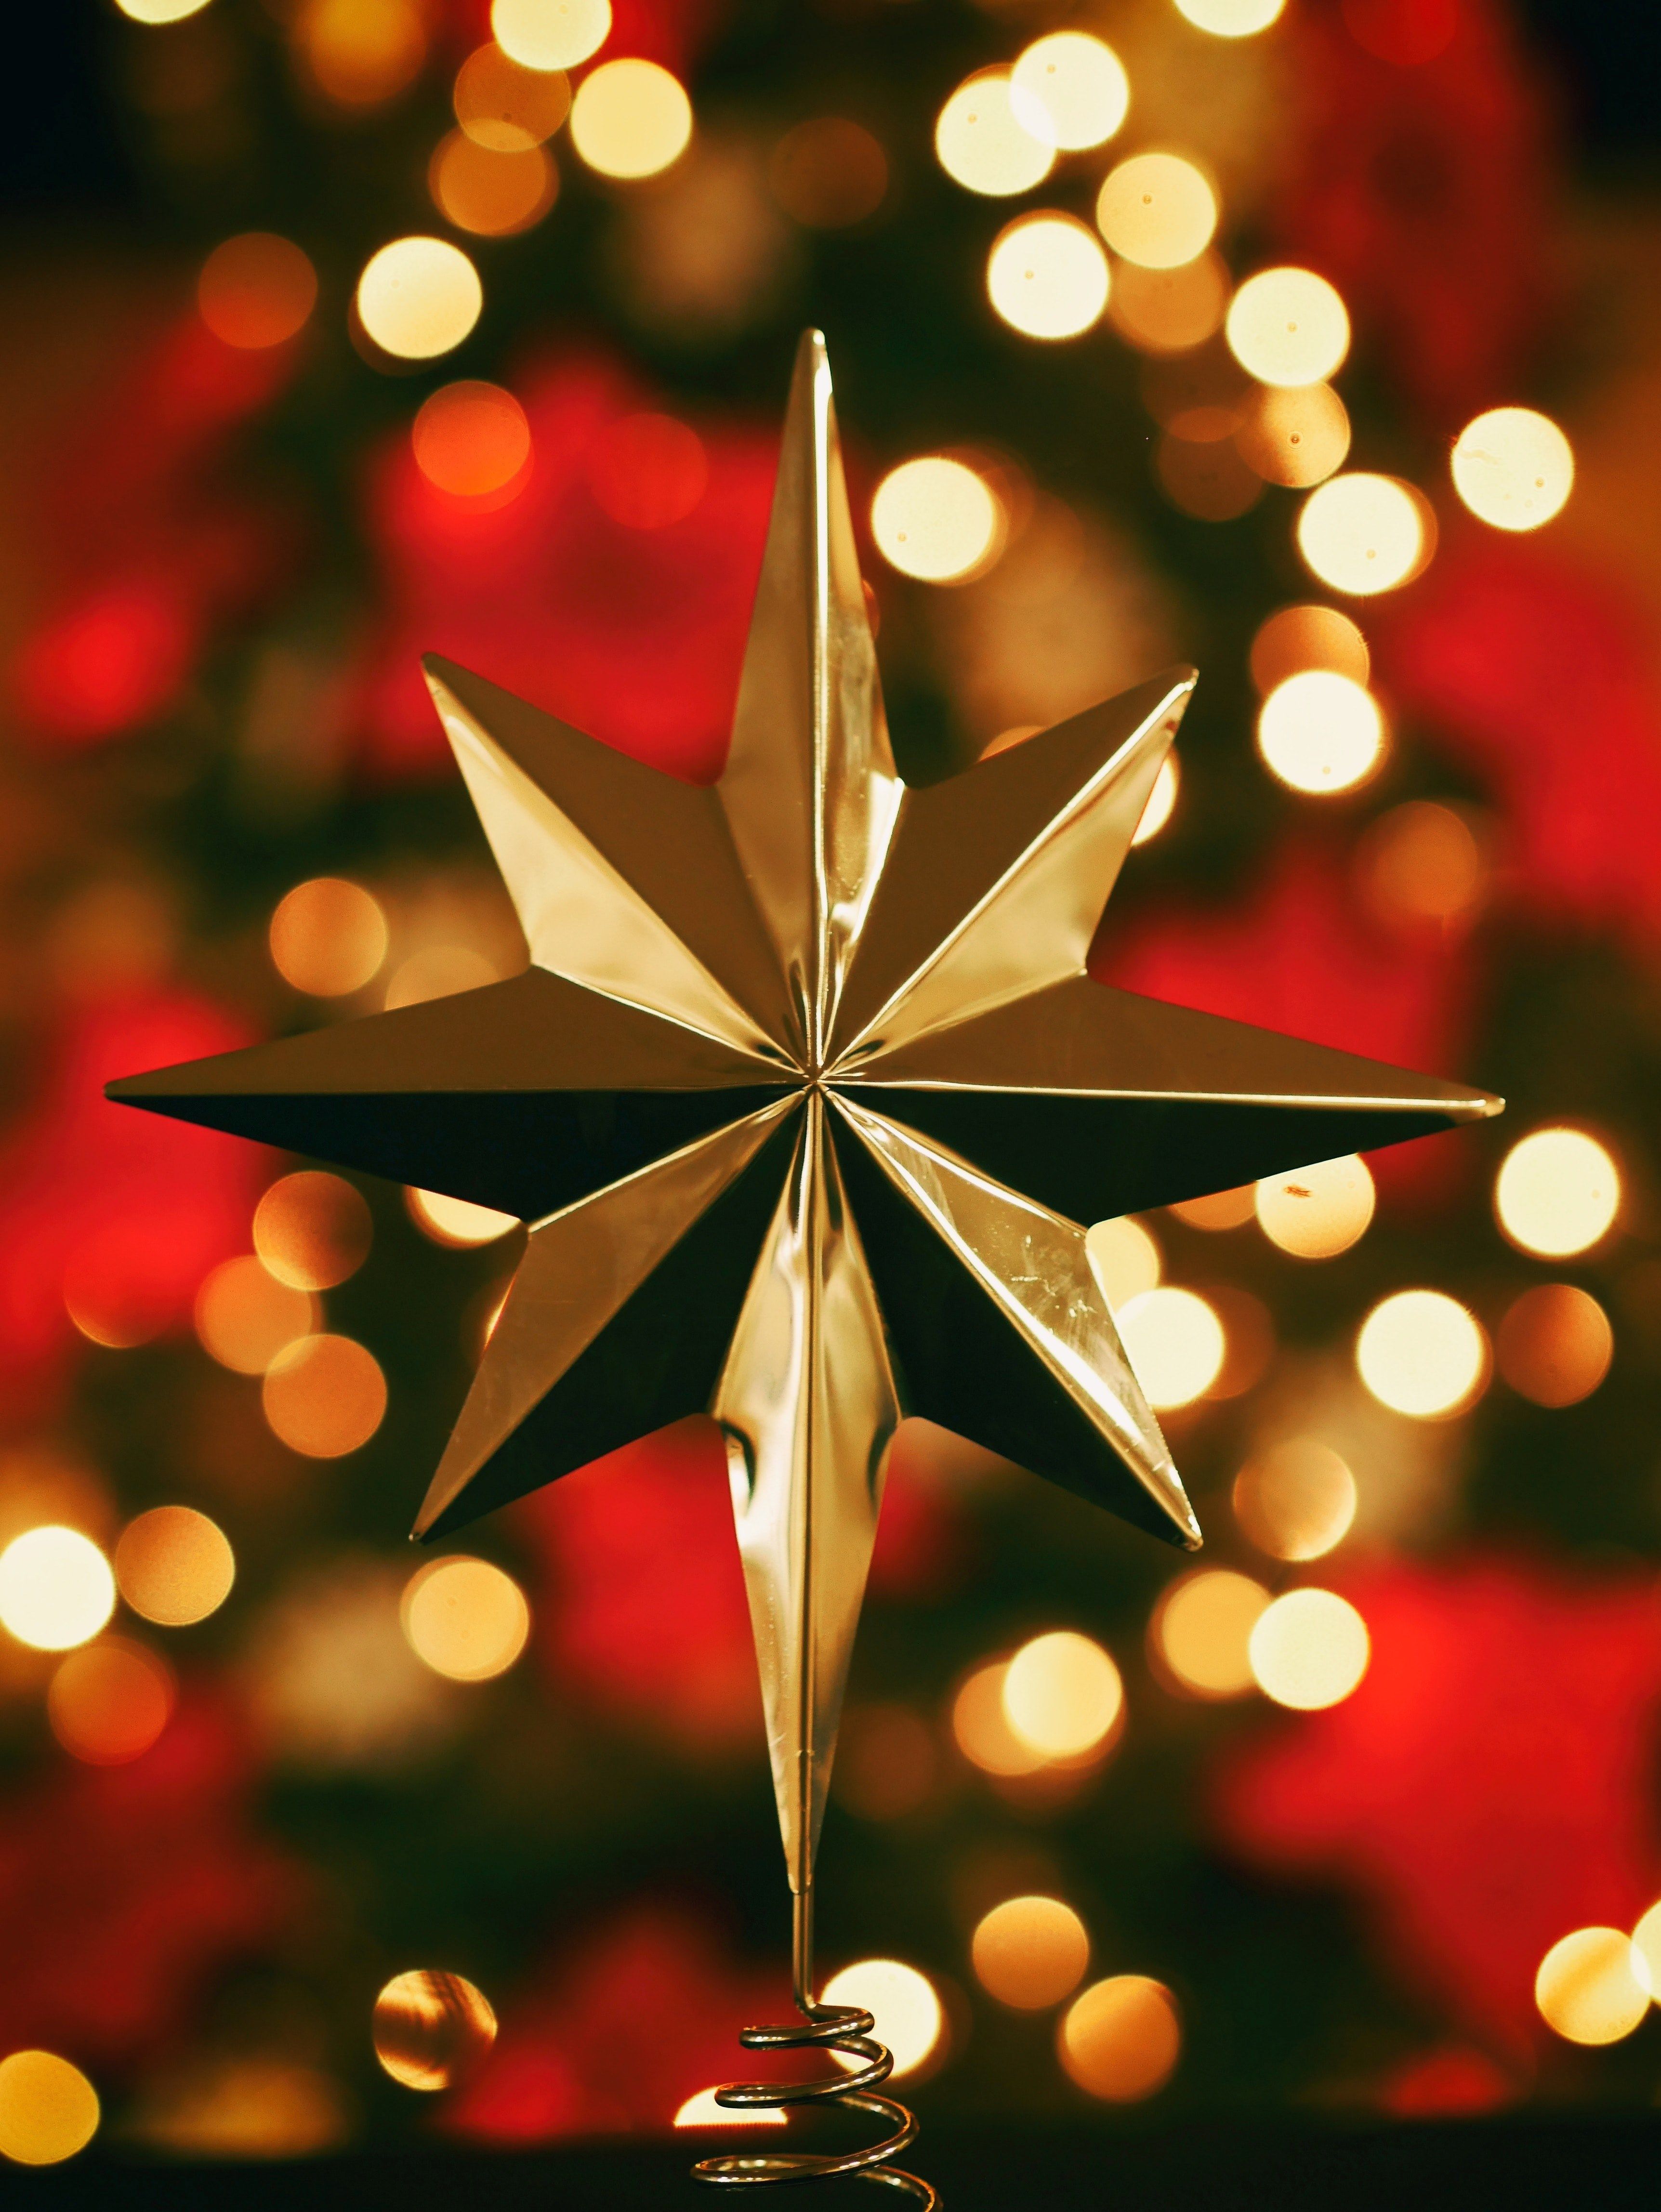 Wallpaper / single gold star in center with unfocused christmas lights and flowers behind at christmastime, christmas star 4k wallpaper free download